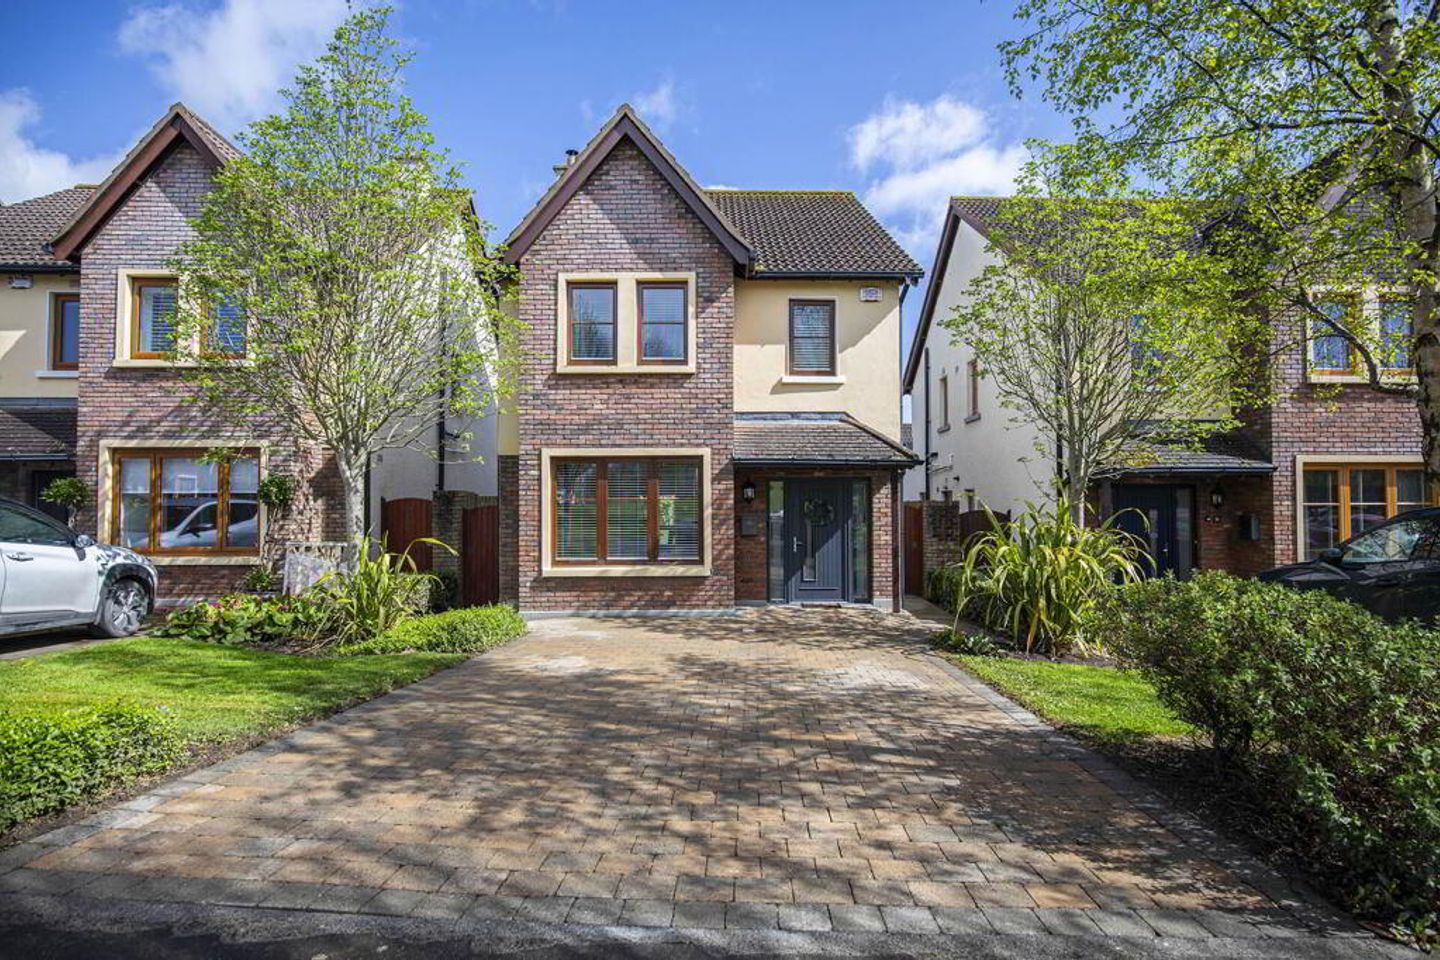 37 Steeplechase Hill, Ratoath, Co. Meath, A85TX92